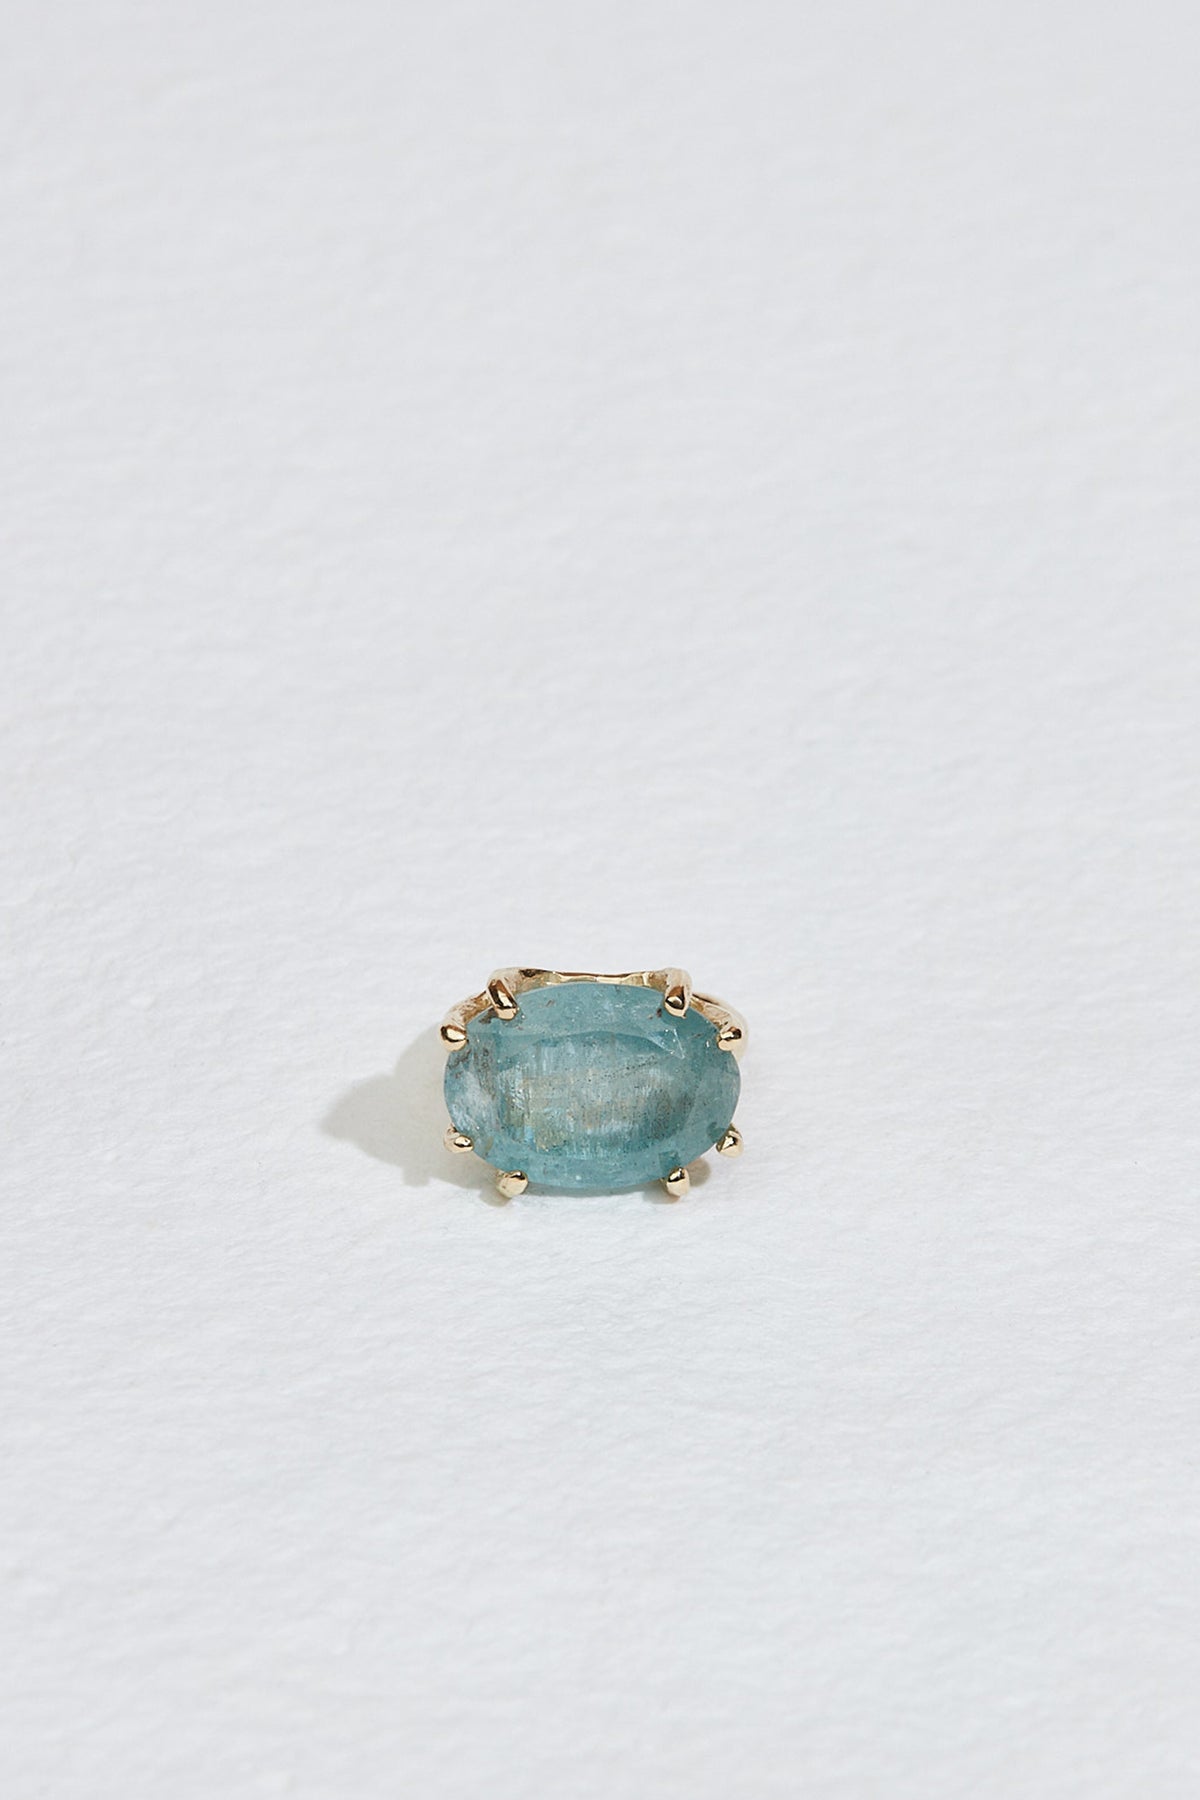 Aquamarine Engagement Ring with Meteorite Shanks | Jewelry by Johan -  Jewelry by Johan